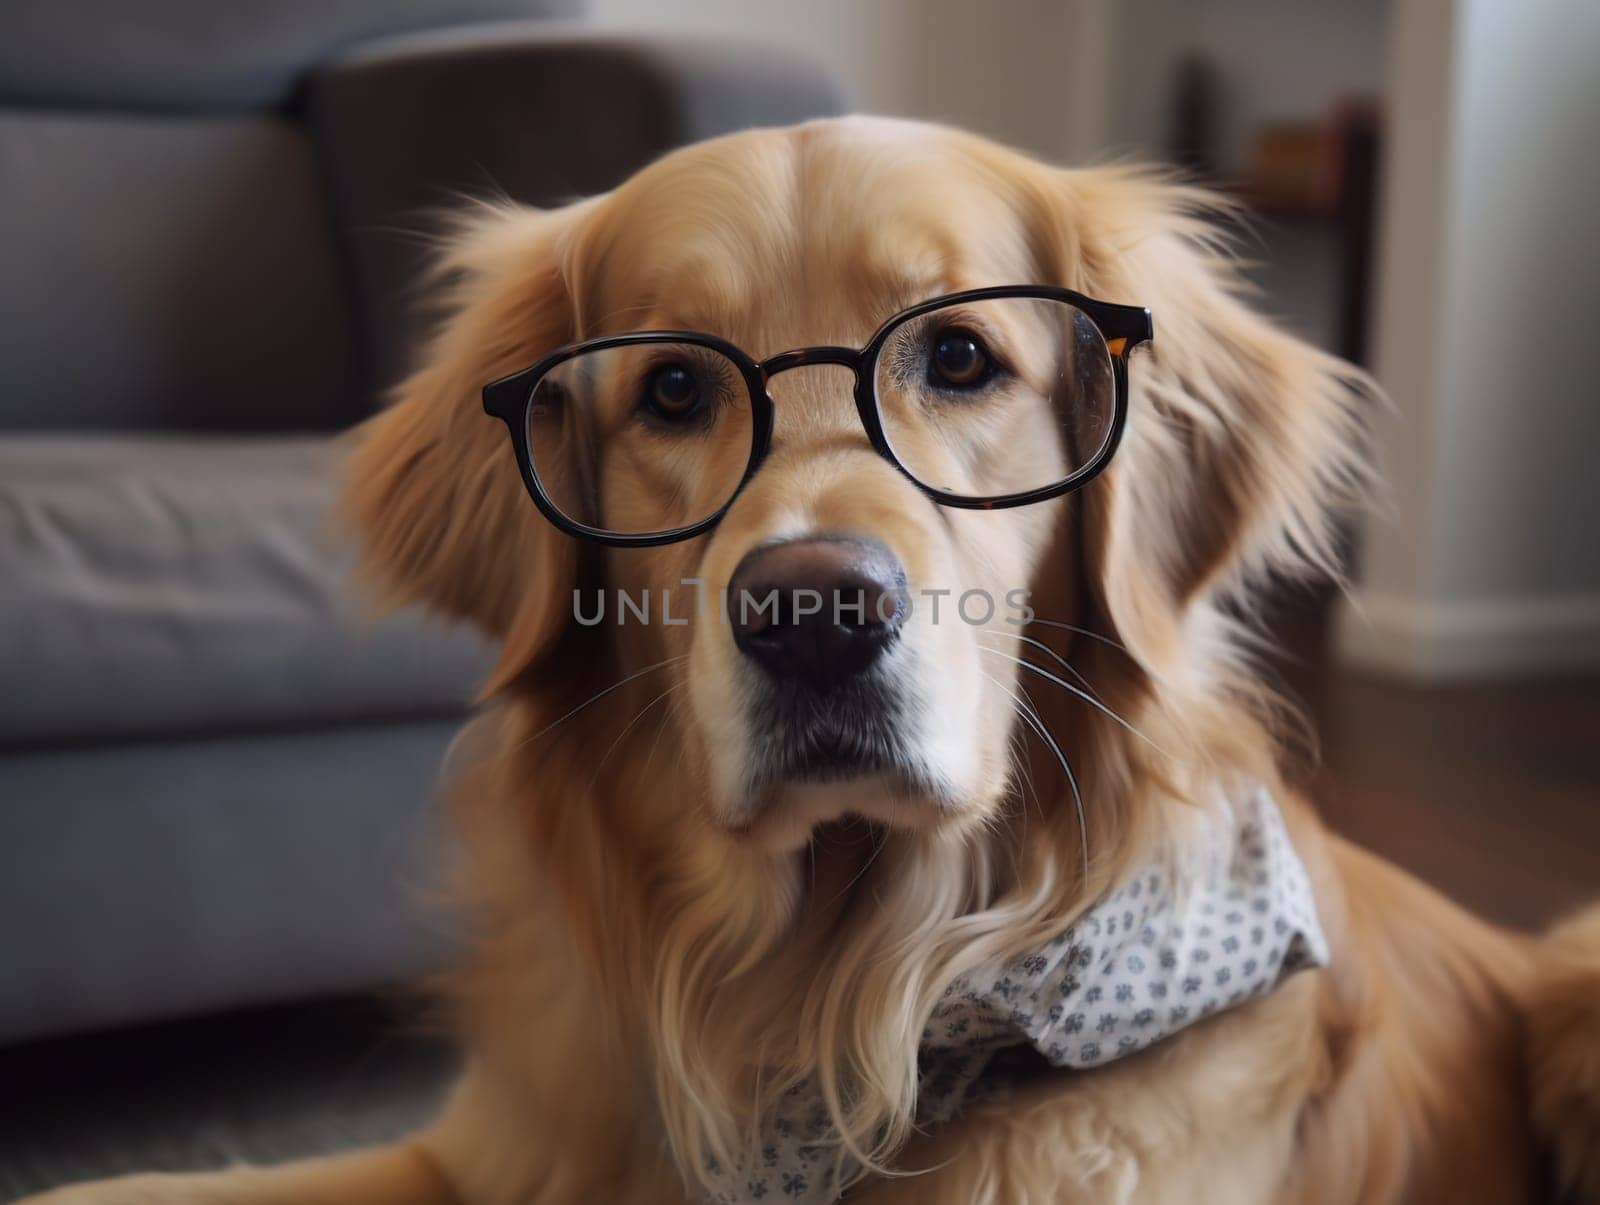 Smart Dog Golden Retriever Breed In Glasses Looking Into The Camera by tan4ikk1